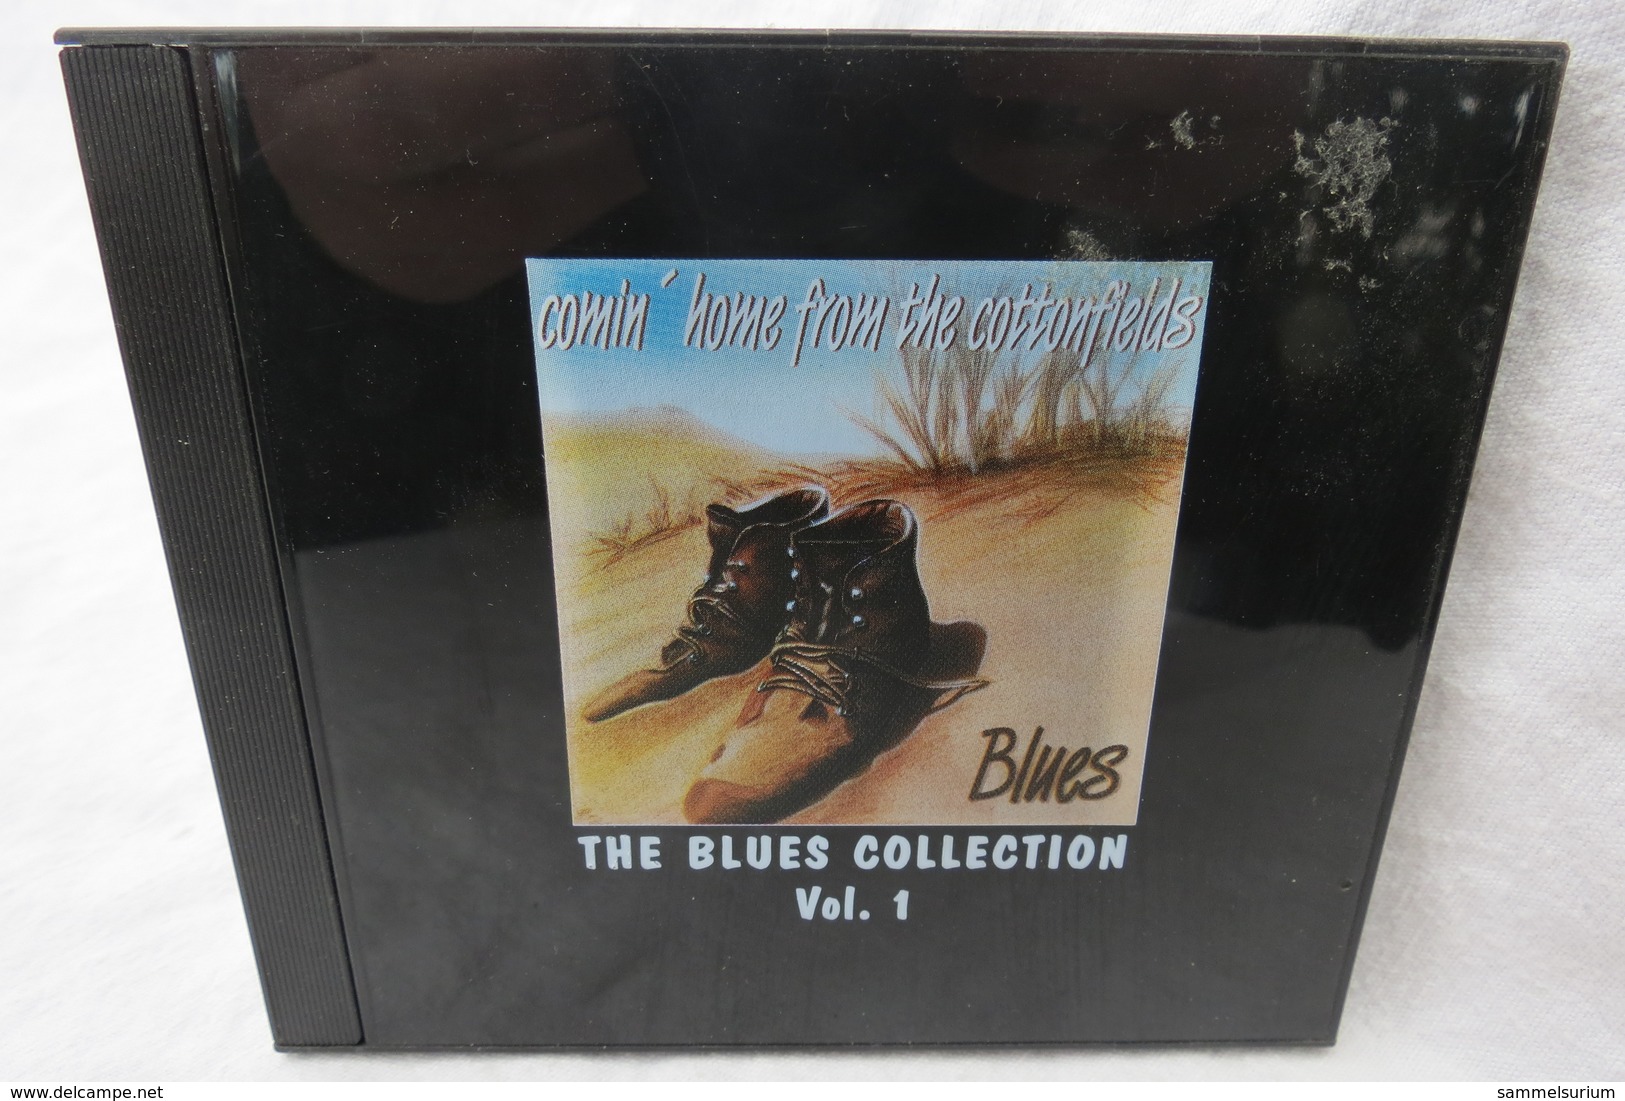 CD "The Blues Collection Vol.1" Comin' Home From The Cottonfields - Blues